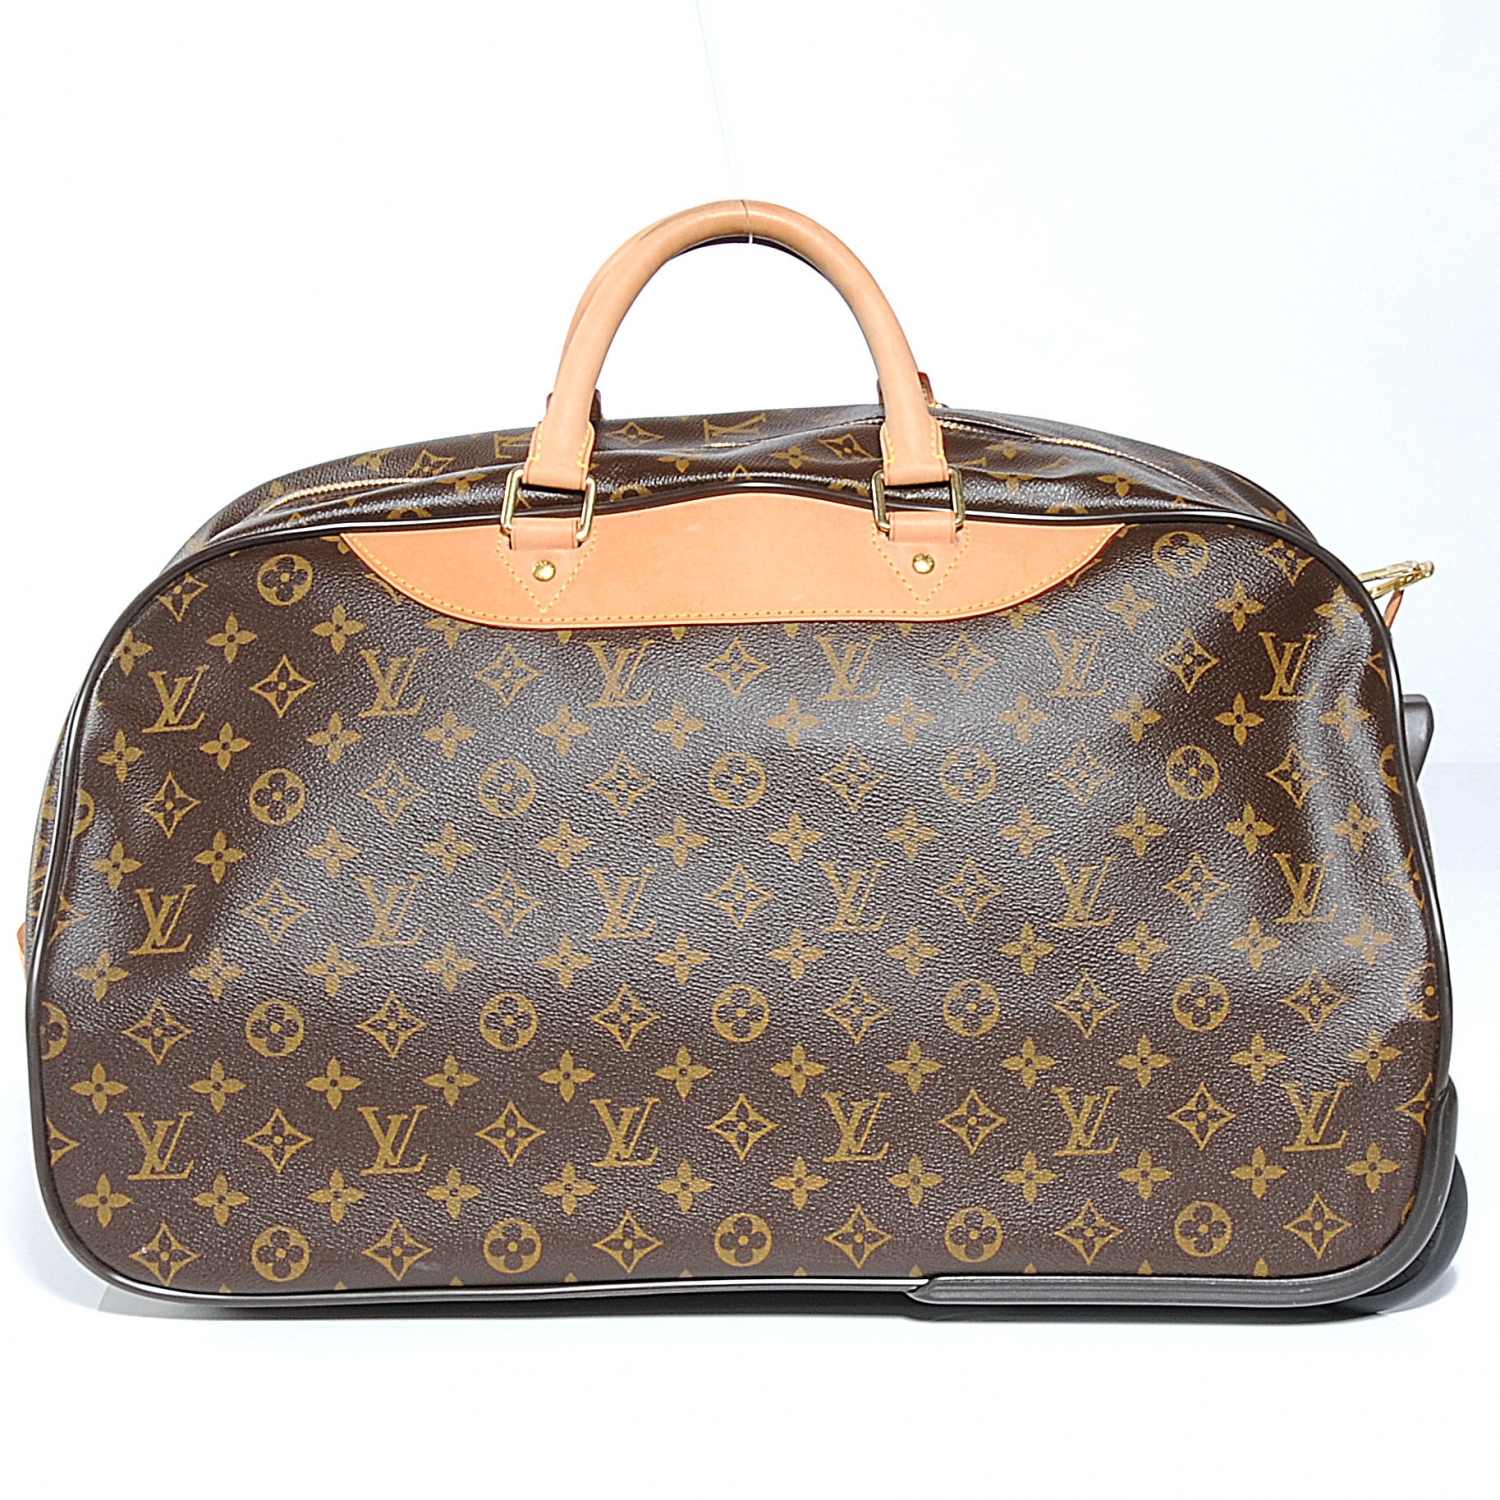 LOUIS VUITTON Monogram Eole 50 Rolling Carry-On Luggage 52240